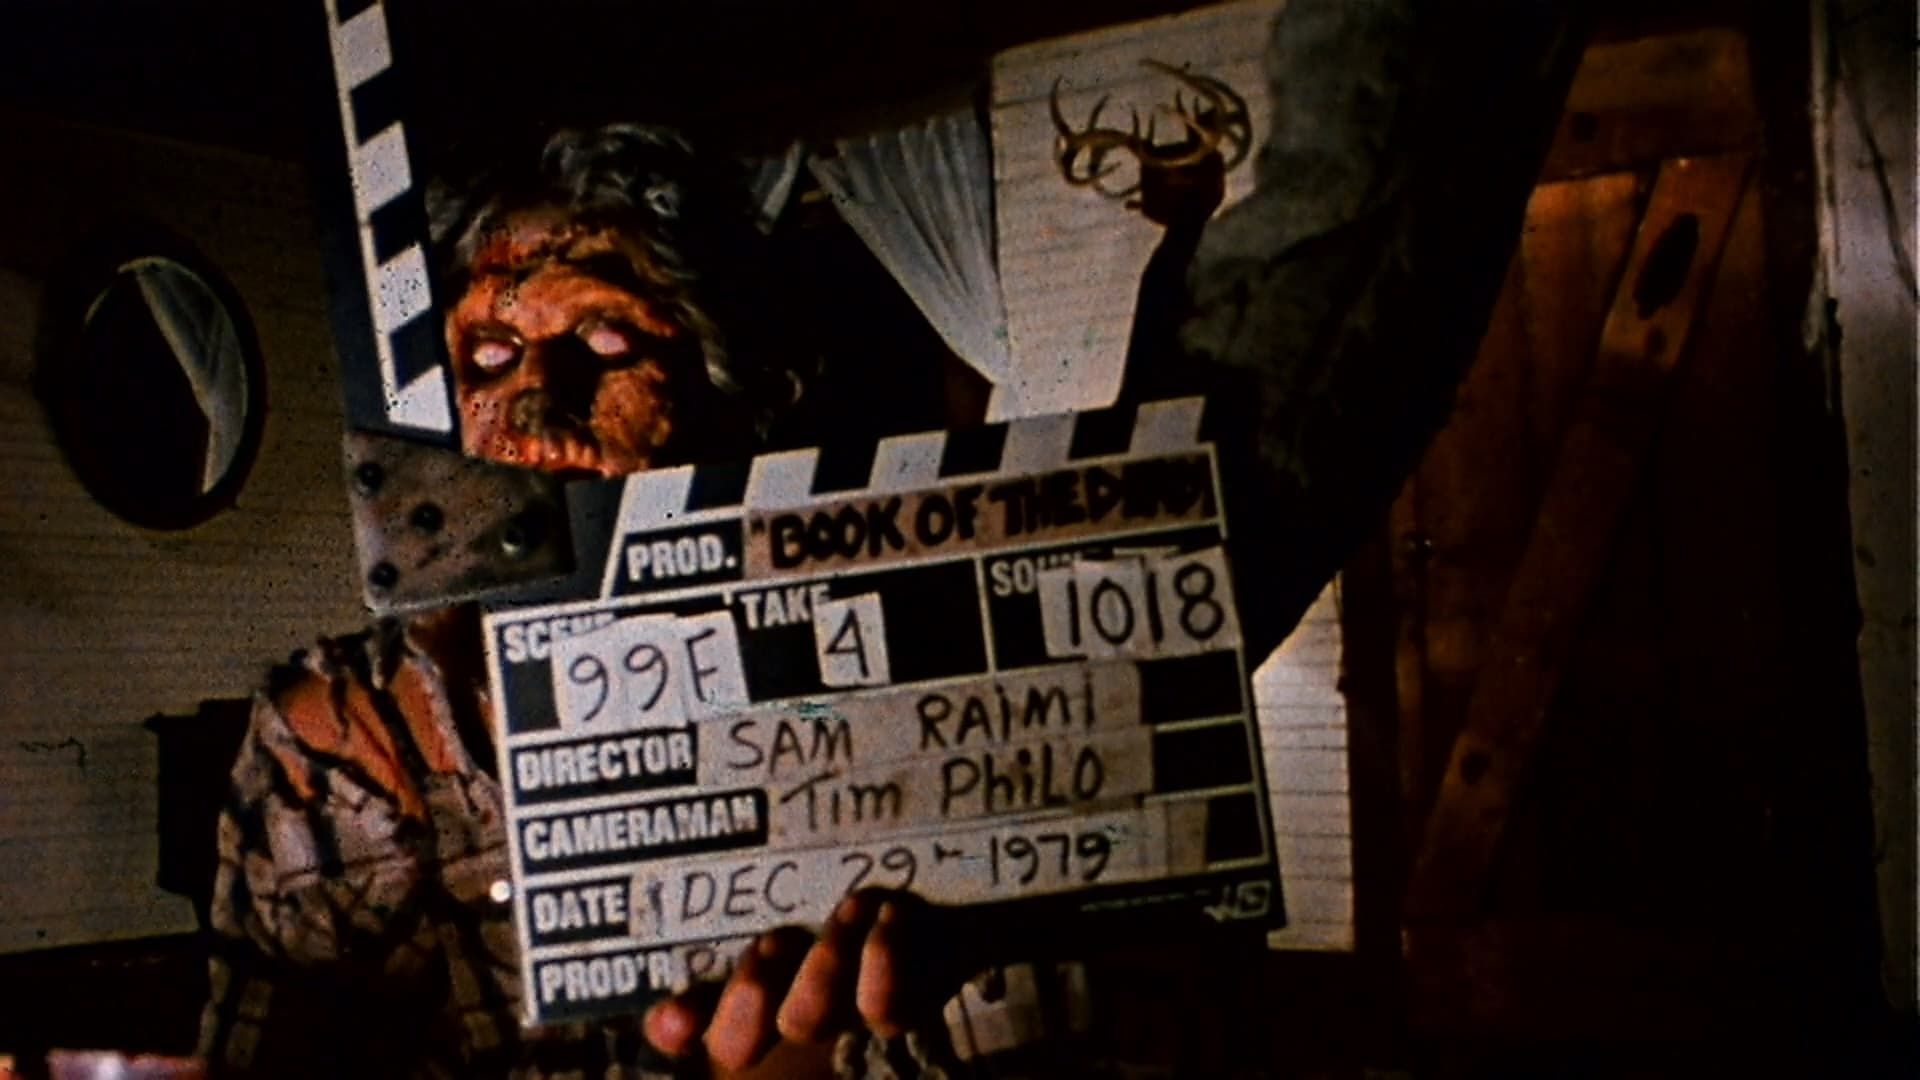 The Evil Dead: Treasures from the Cutting Room Floor background